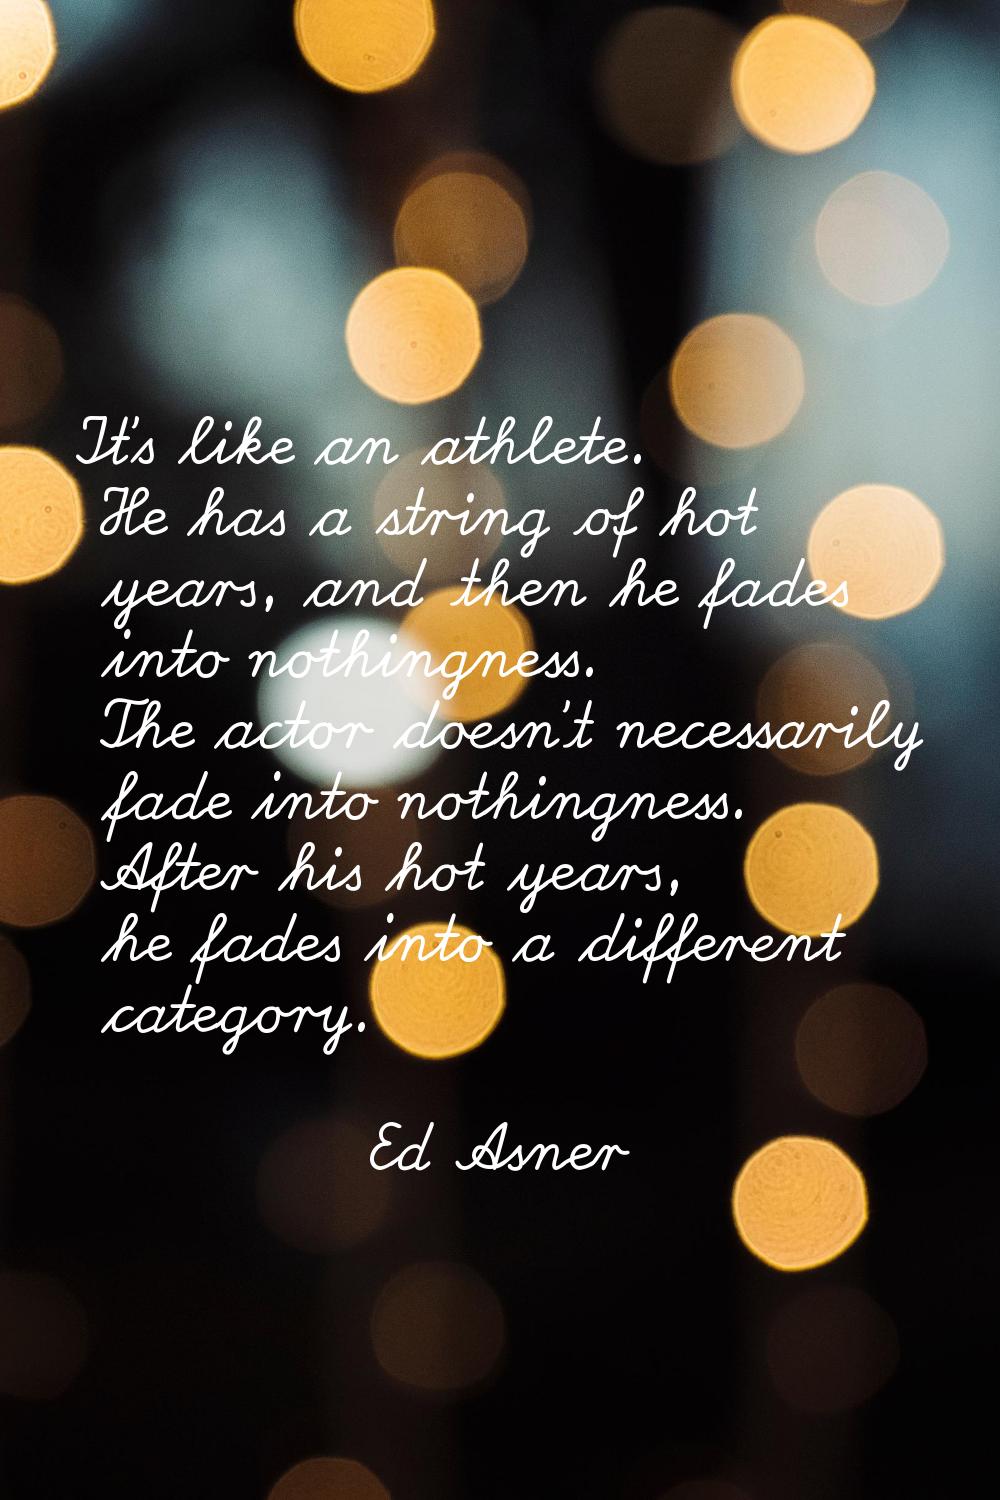 It's like an athlete. He has a string of hot years, and then he fades into nothingness. The actor d